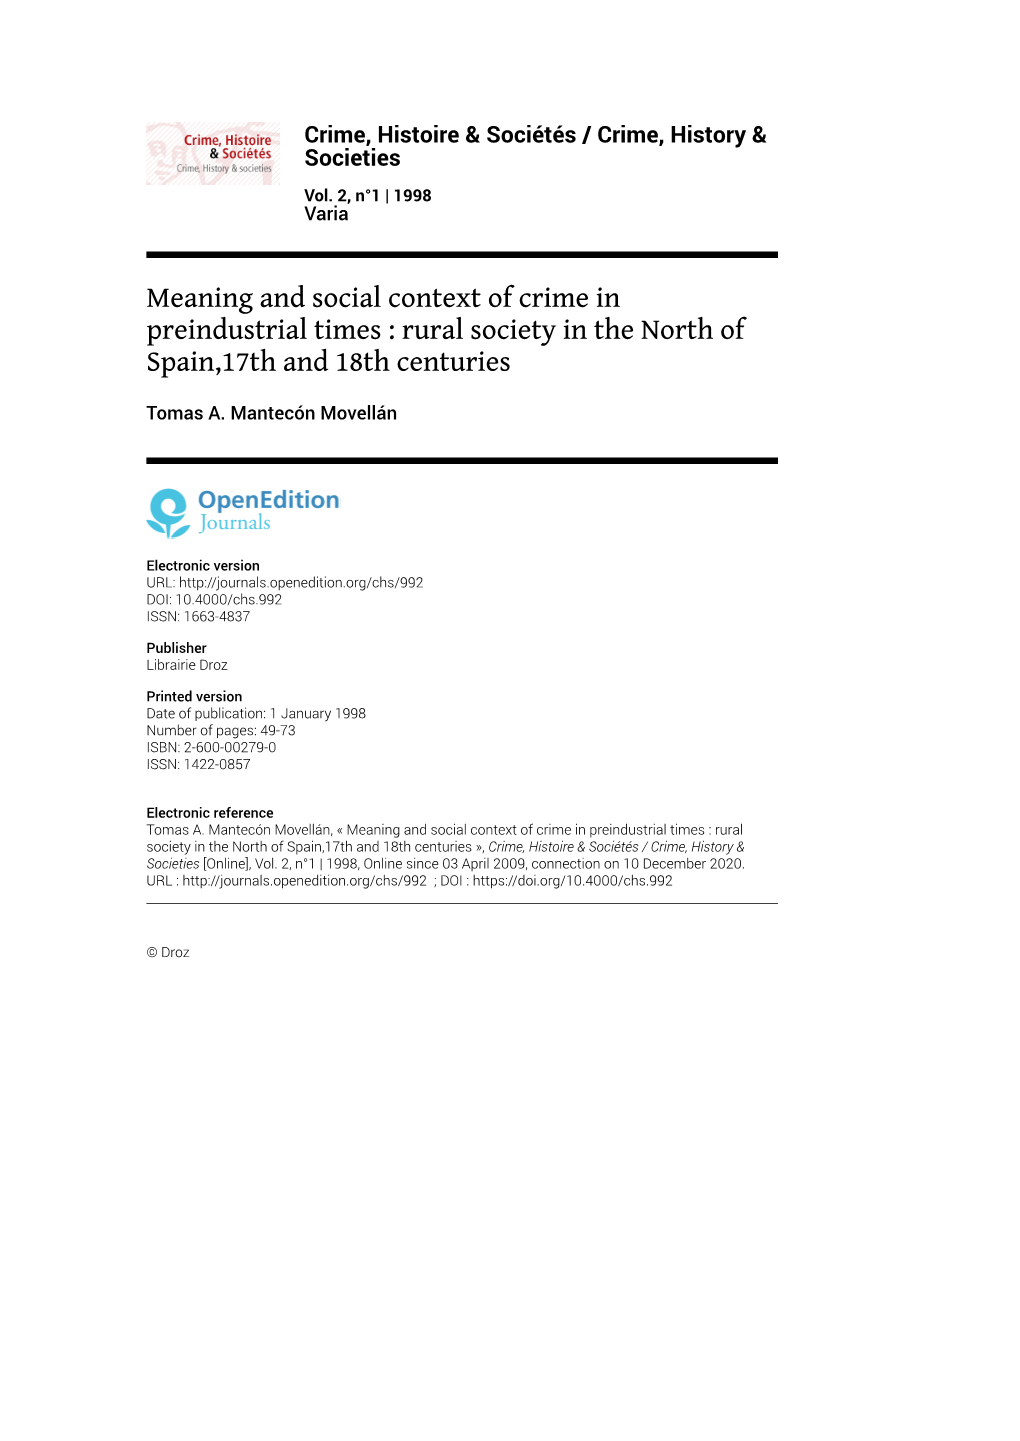 Meaning and Social Context of Crime in Preindustrial Times : Rural Society in the North of Spain,17Th and 18Th Centuries